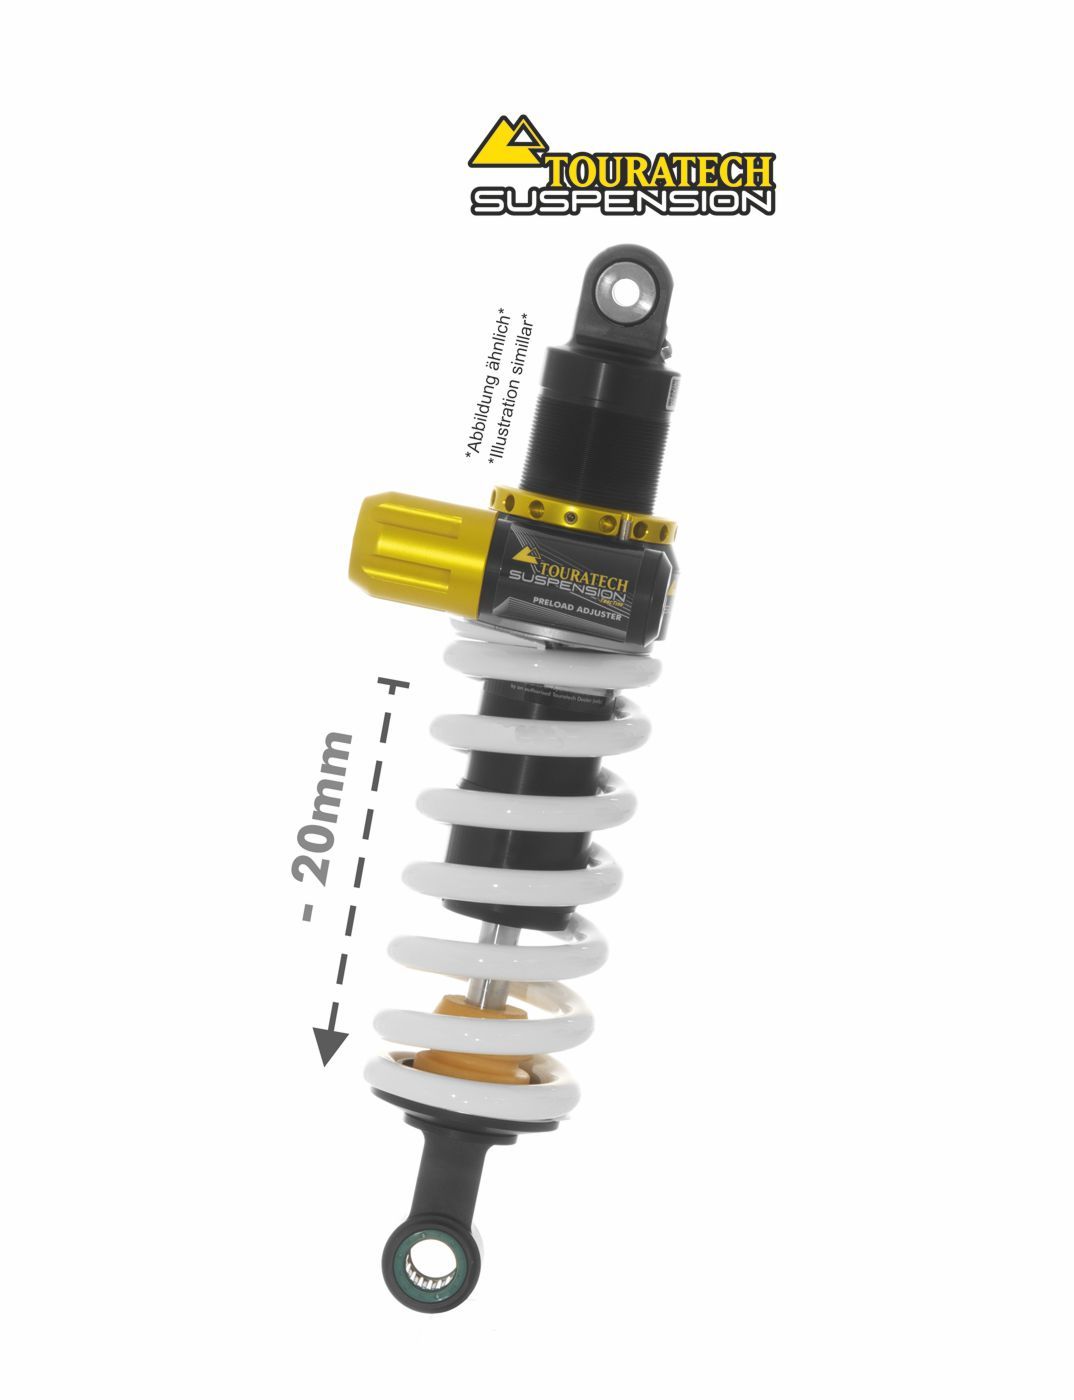 Touratech Suspension lowering shock (-20mm) for Triumph Tiger 900 Rallye Pro from 2020 Type Explore HP/PDSTouratech Suspension lowering shock (-20mm) for Triumph Tiger 900 Rallye Pro from 2020 Type Explore HP/PDS